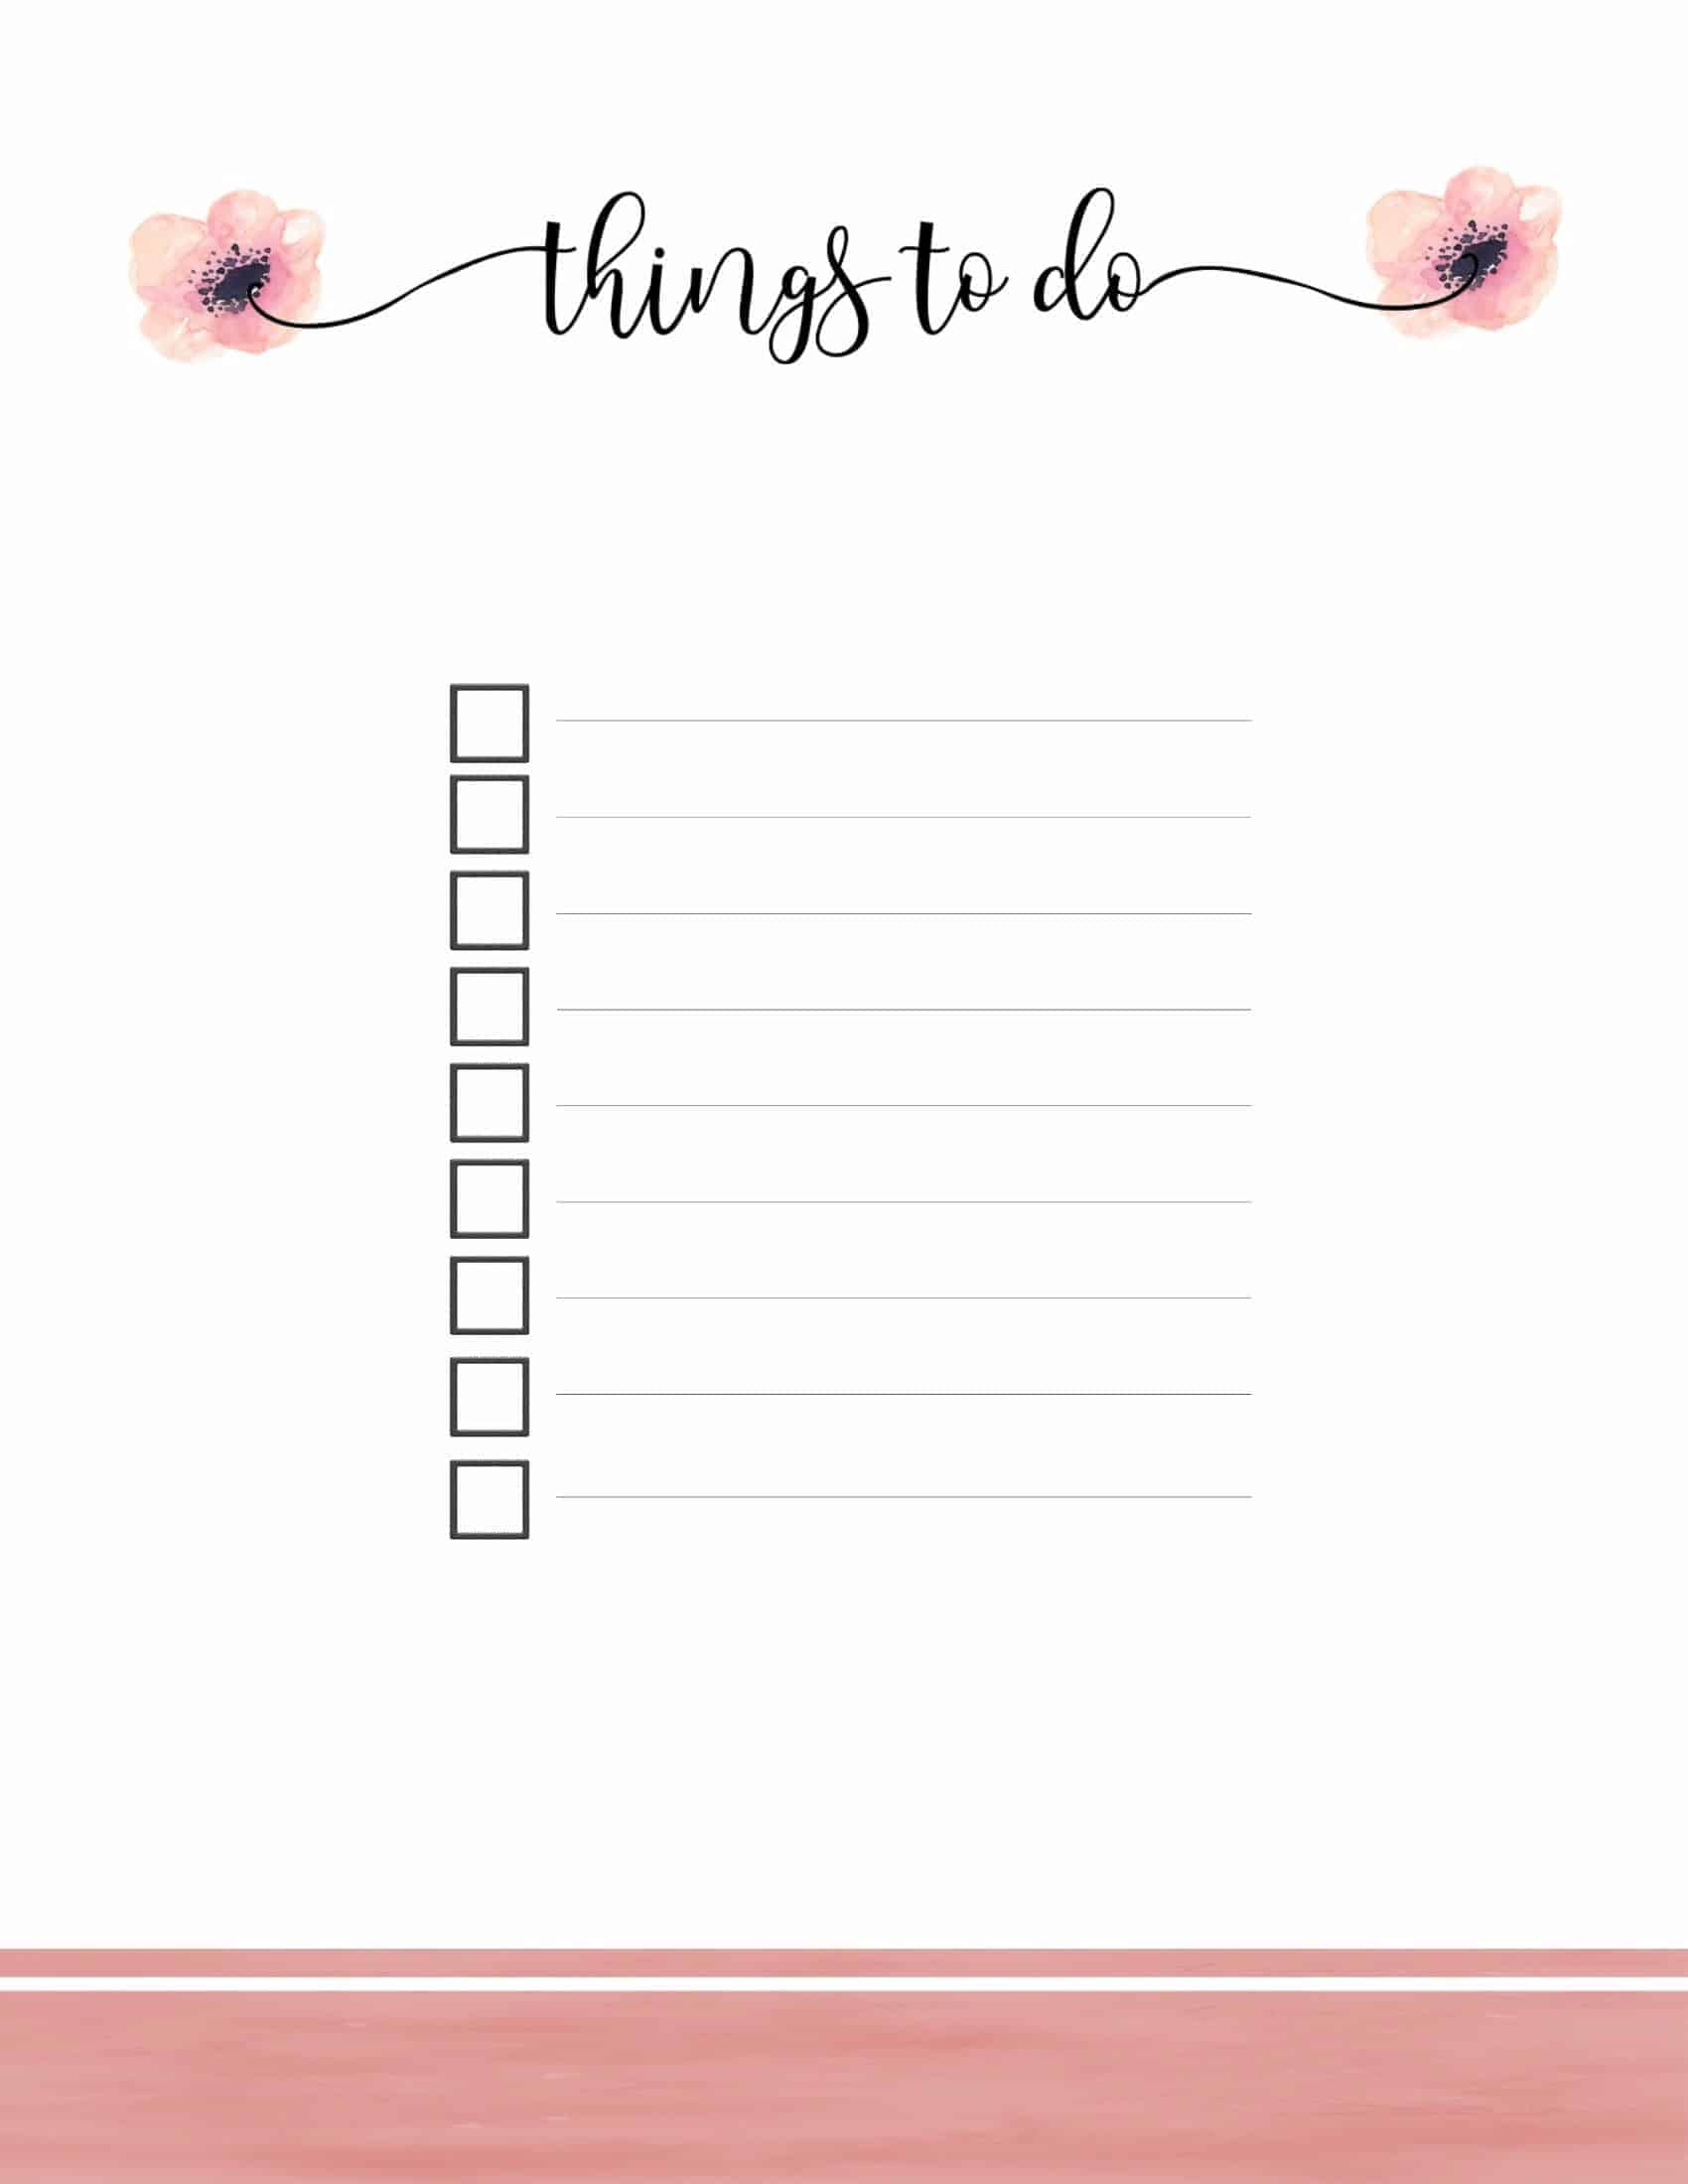 To Do List Print Out